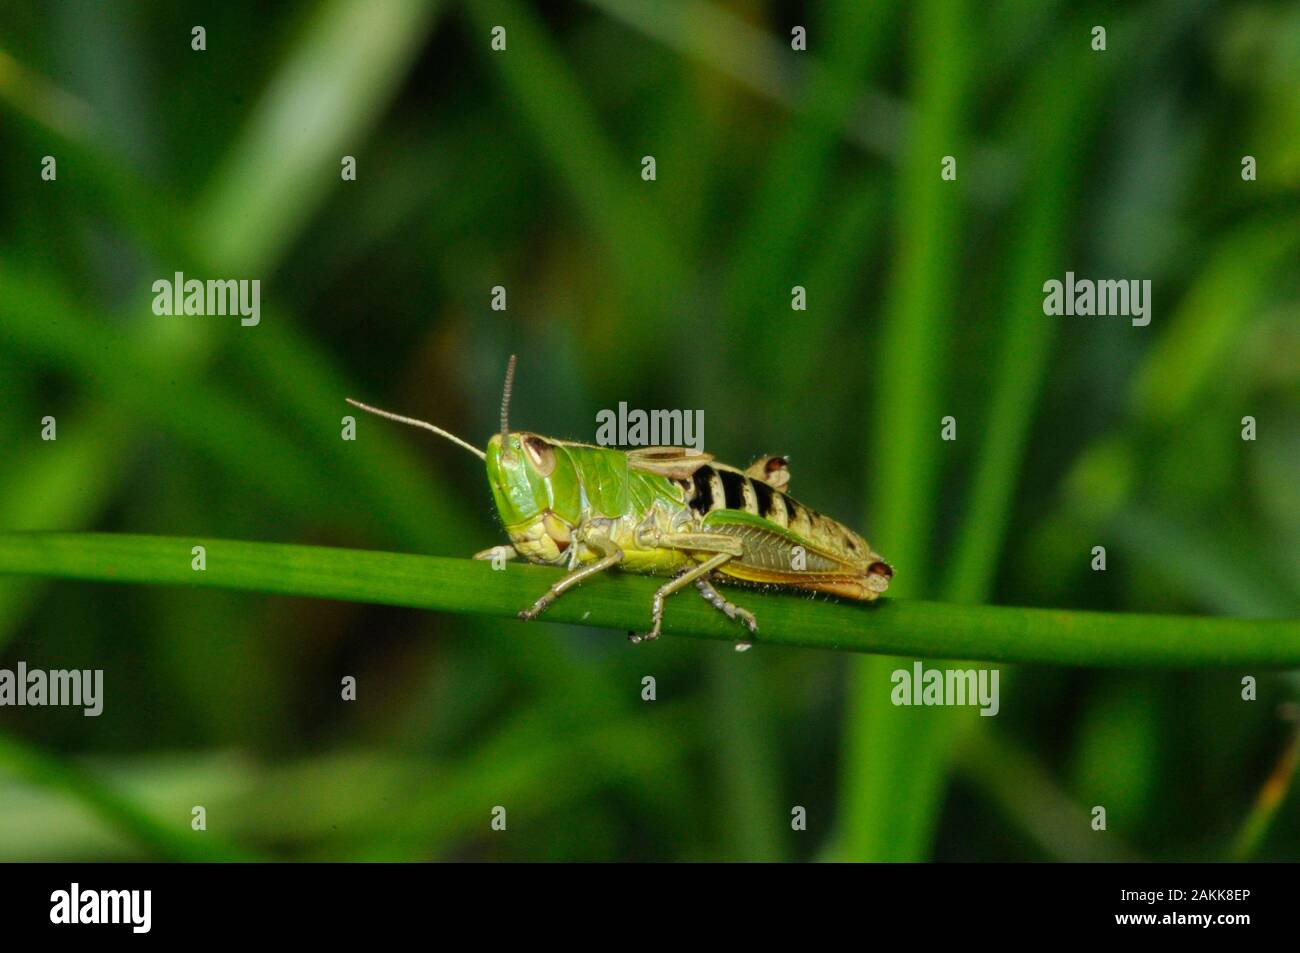 Meadow Grasshopper 'Chorthippus parallelus',voladora, corto forewings,insecto,Cley hill, Wiltshire.UK Foto de stock